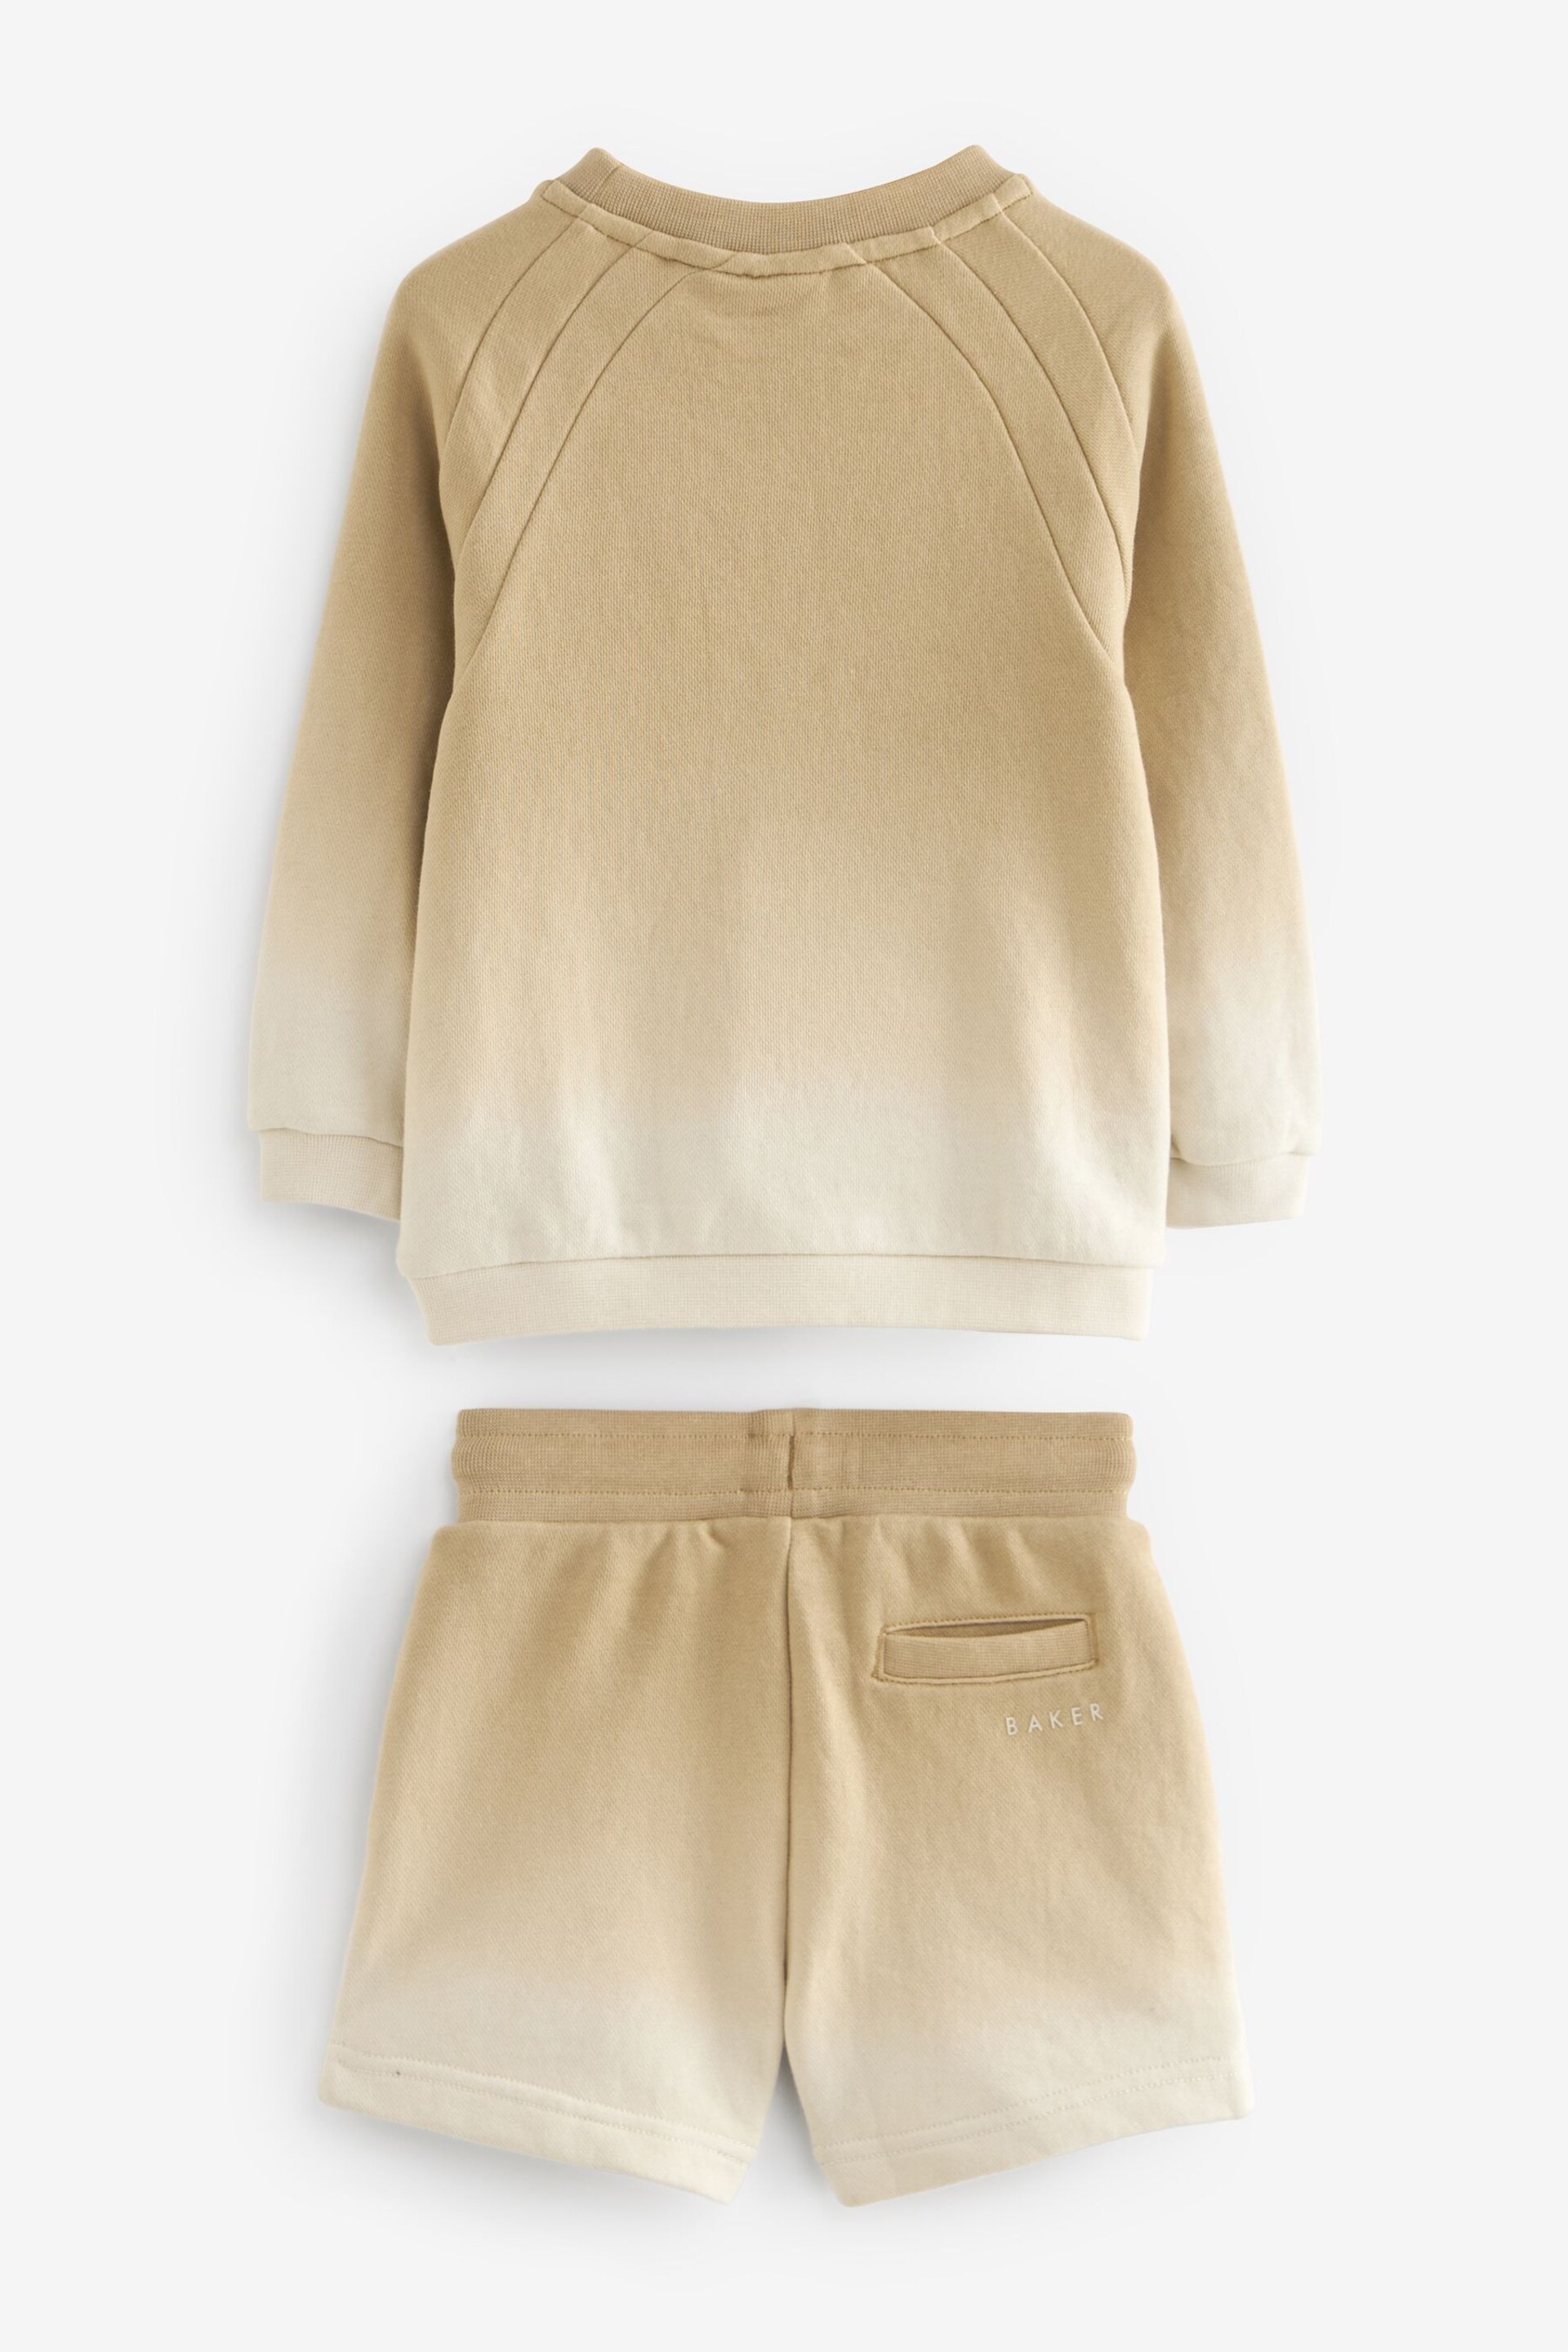 Baker by Ted Baker Ombre Sweater And Shorts Set - Image 2 of 9